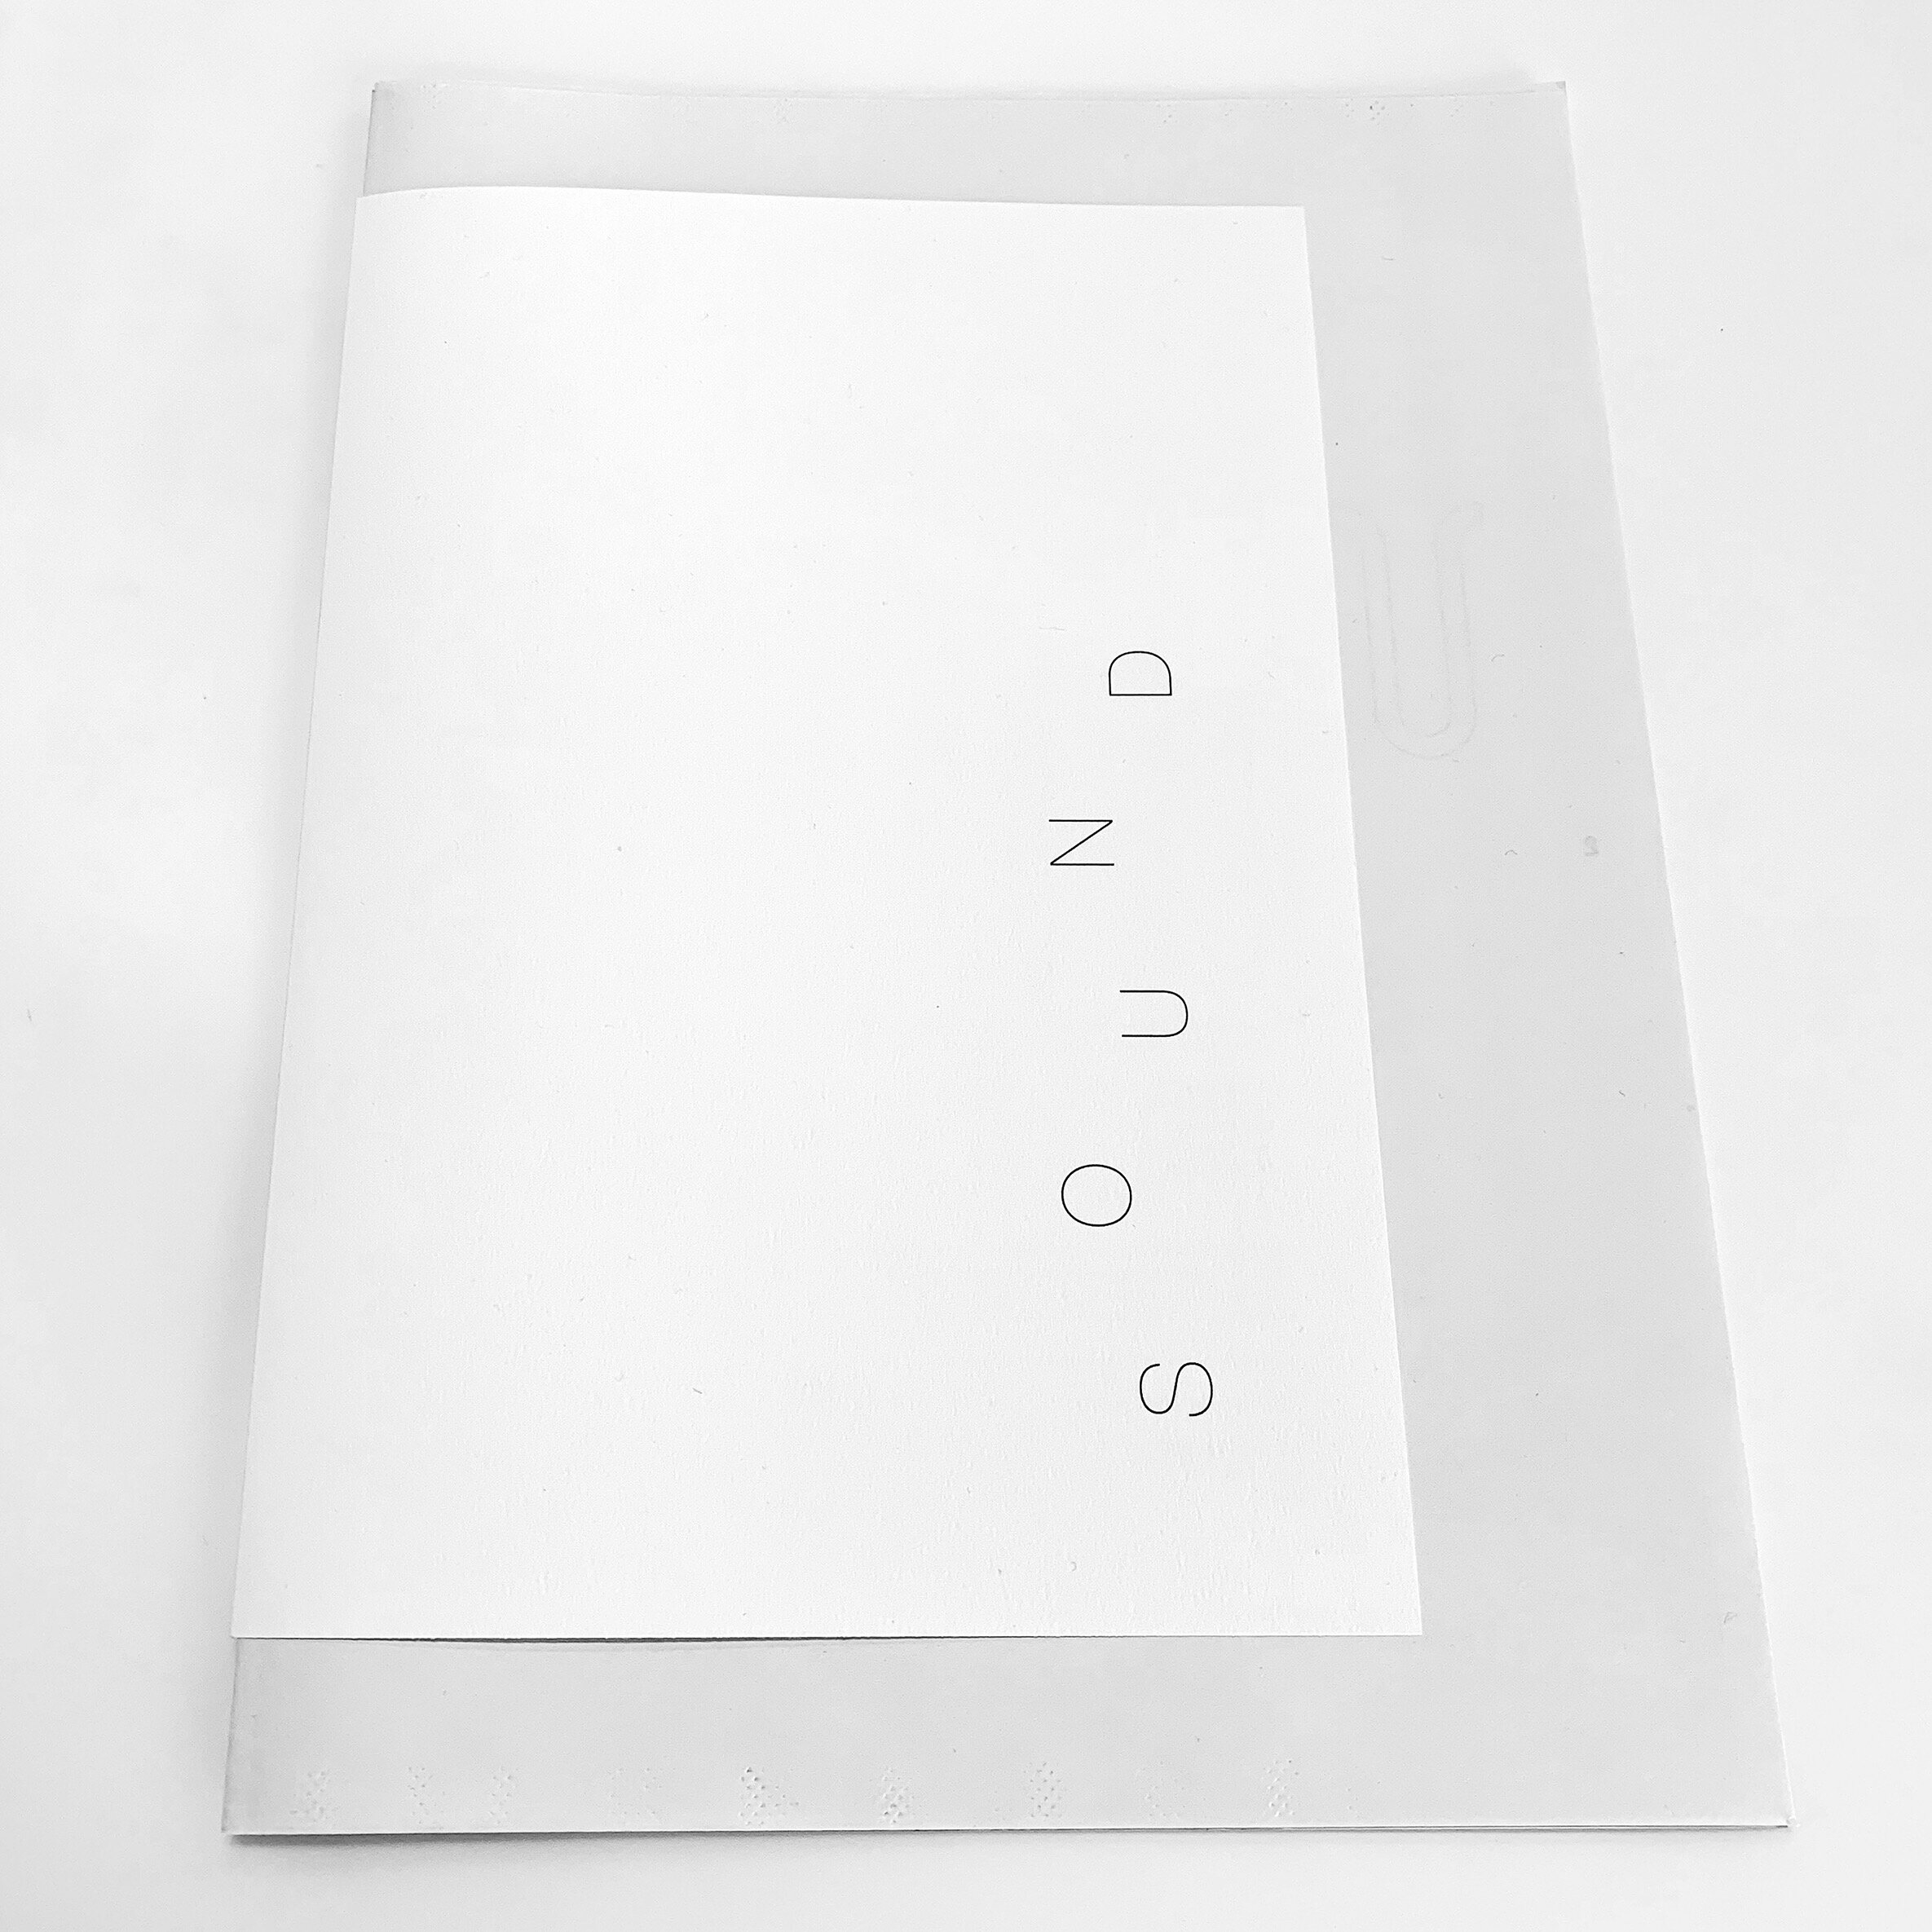  SOUND  is a new publication of sounding objects, writing, and notation that  engage ideas of the visual, material, and vocal aspects of  sound.&nbsp;Featuring work by  Rosaire Appel ,  Karen Donnellan ,  Elana Mann ,  Emmalea Russo , and  Karen Weis